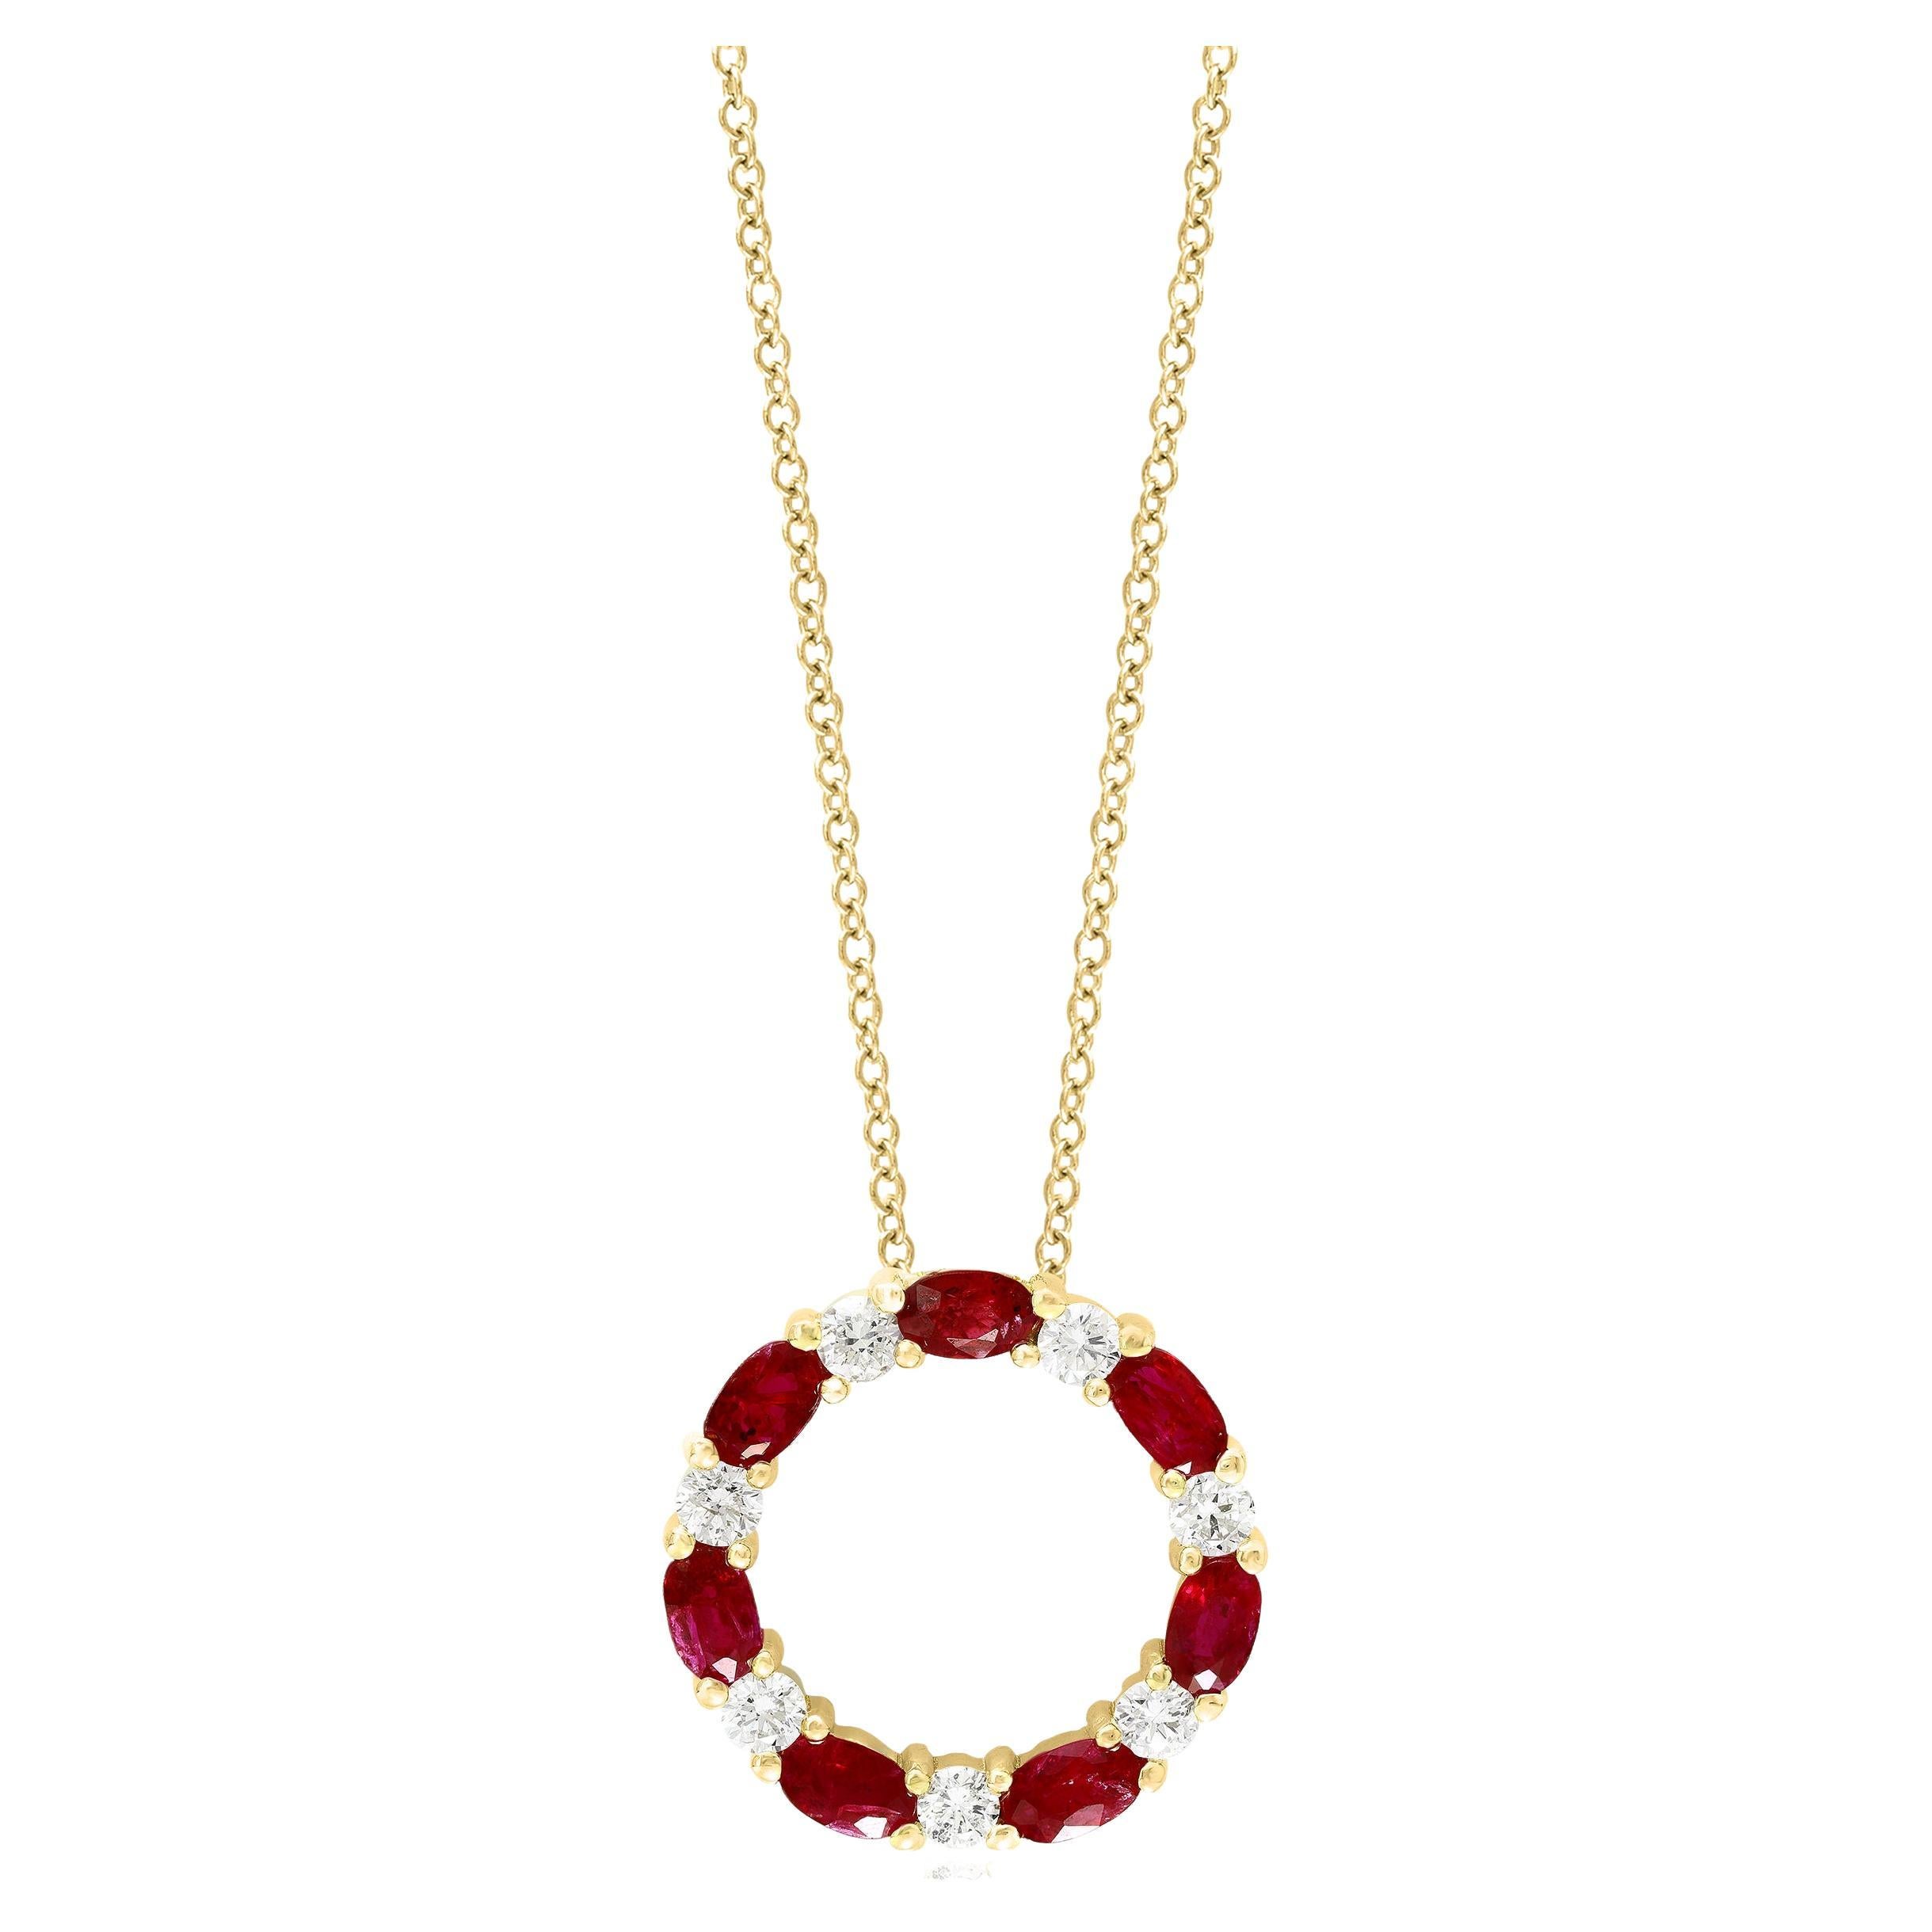 1.99 Carat Ruby and Diamond Circle Pendant Necklace in 14K Yellow Gold